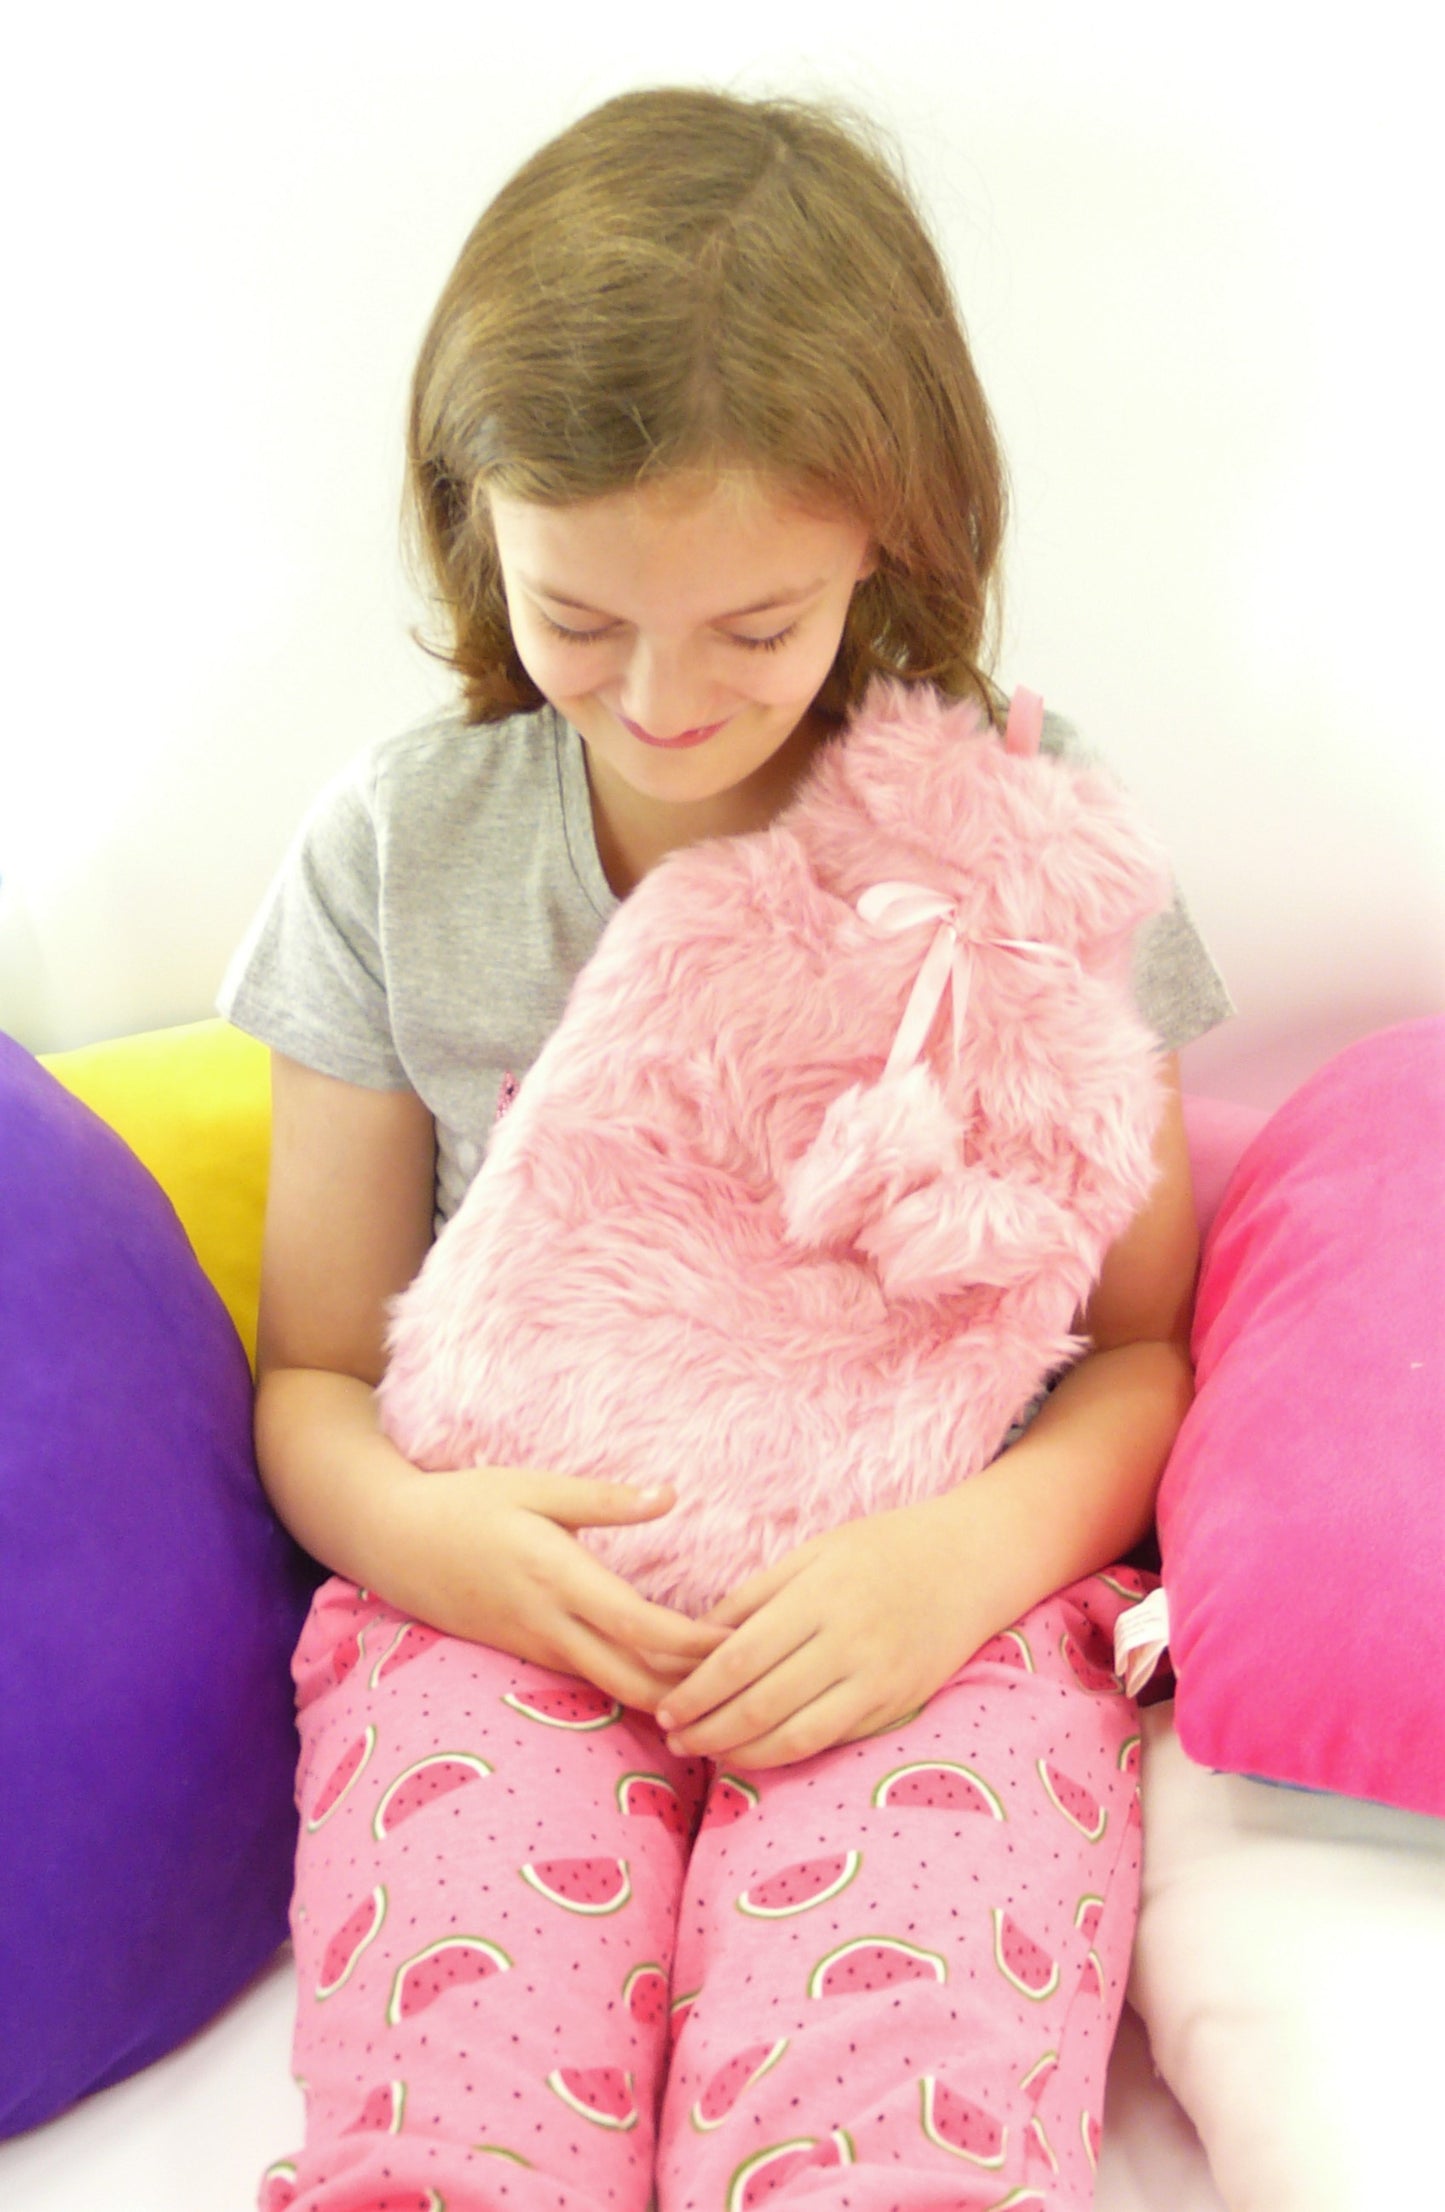 Slumberzzz Lush Plush with Pom Pom Hot Water Bottle 2 Litre Pink